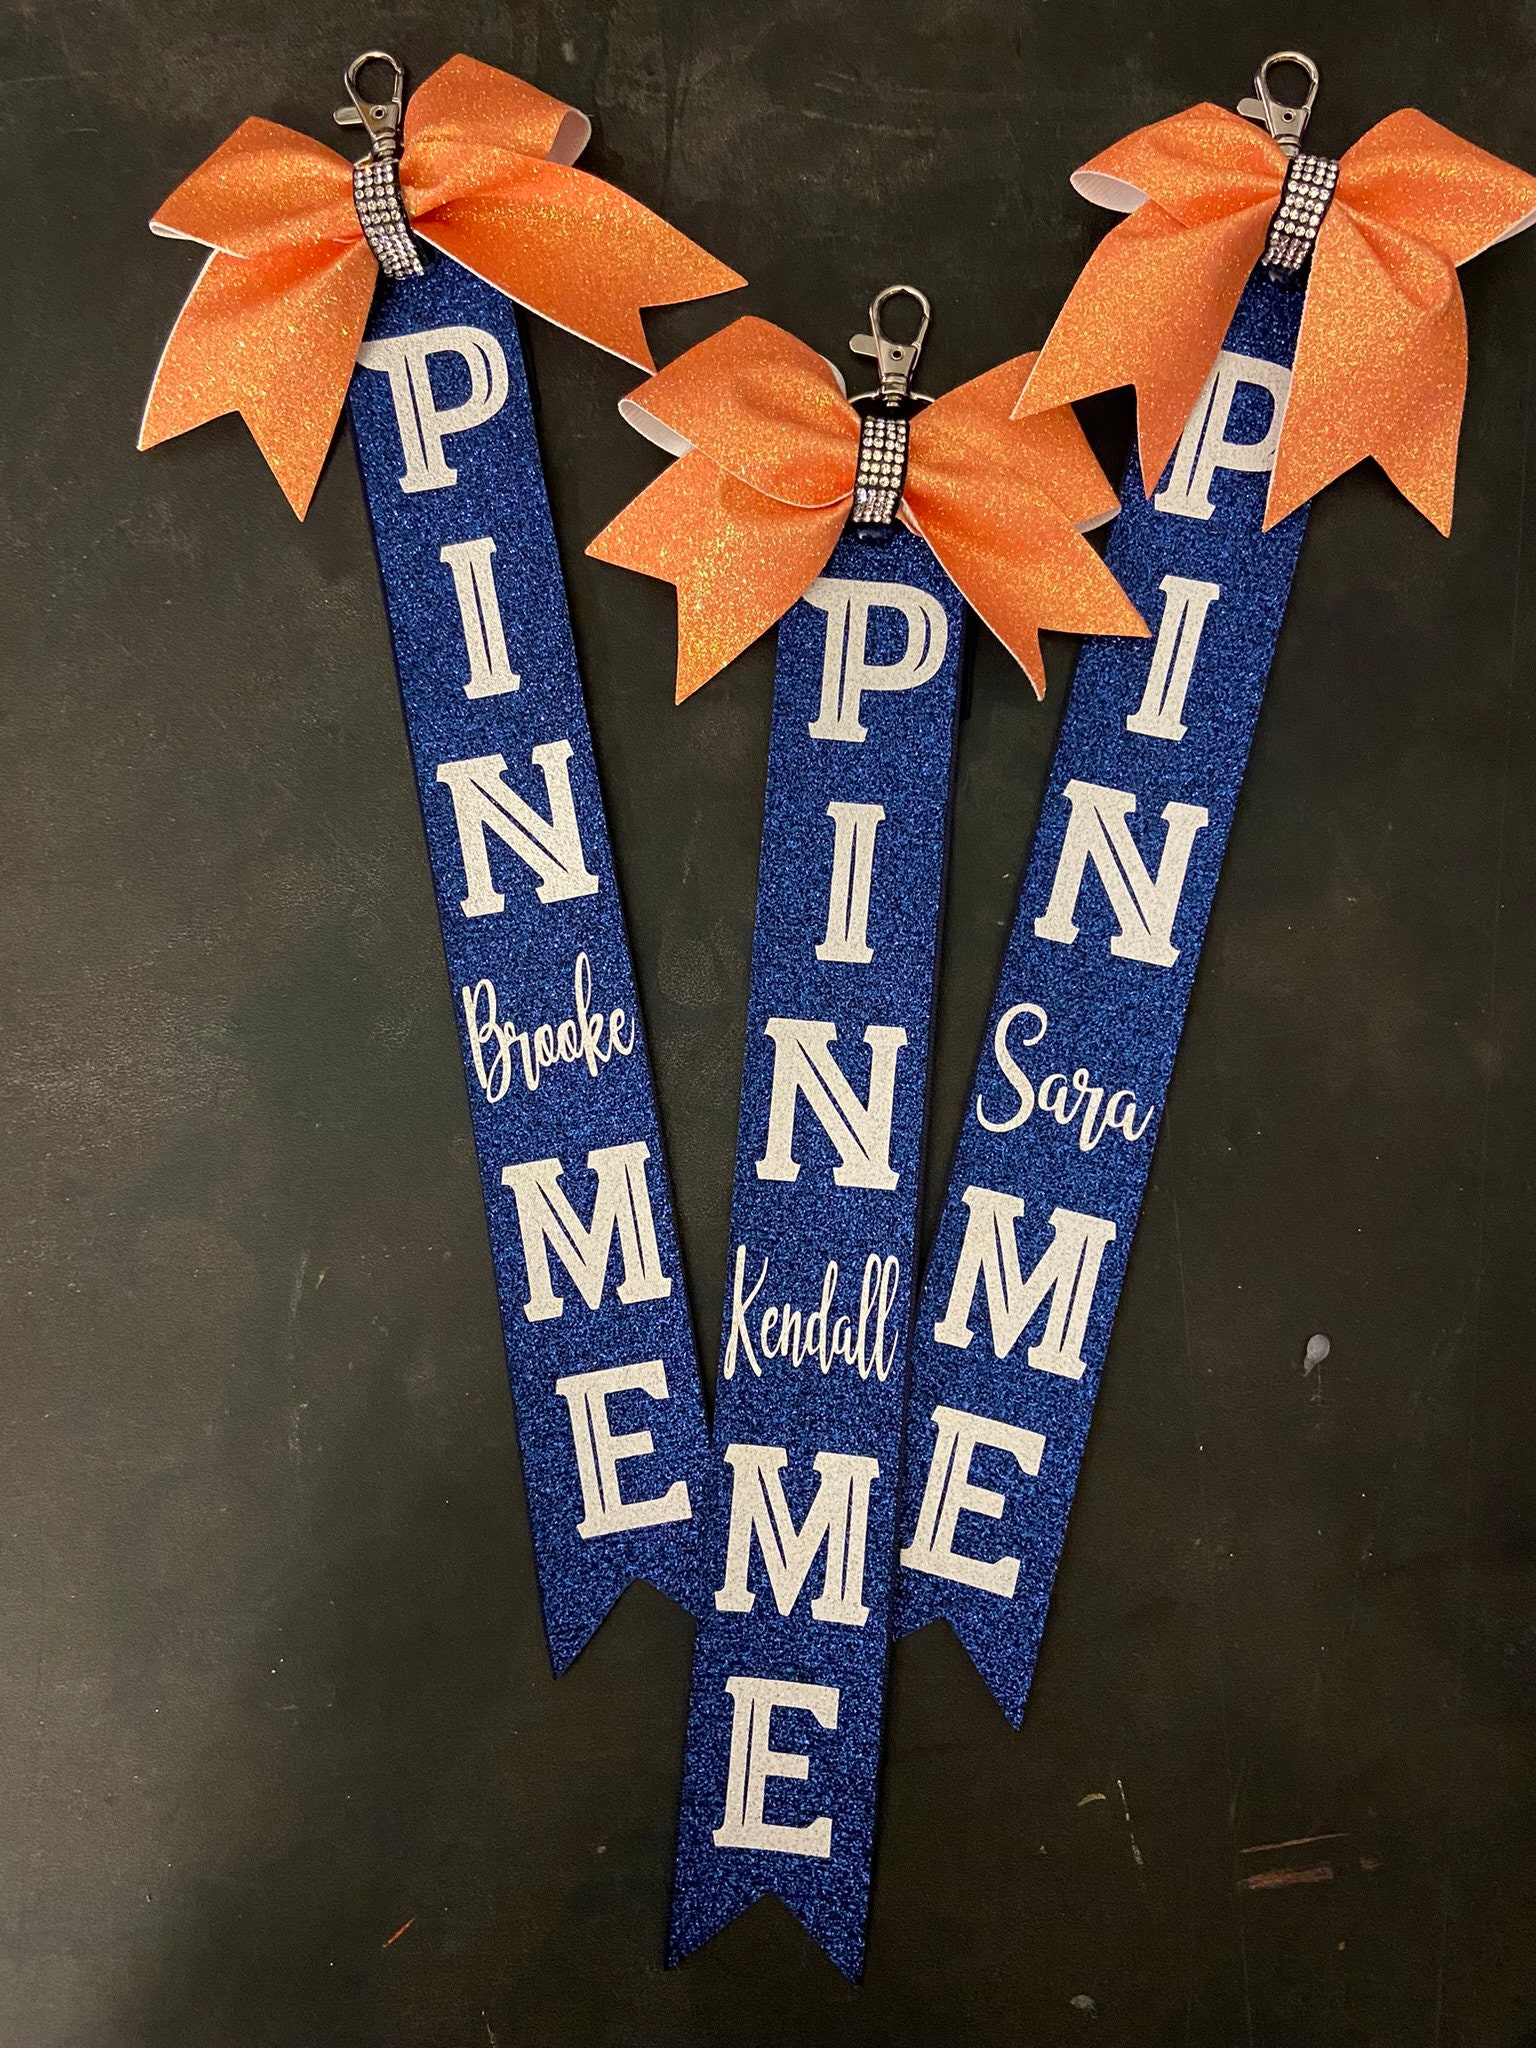 PIN ME ribbons now available for purchase ! ☺️😘😘🙌🏼🙌🏼